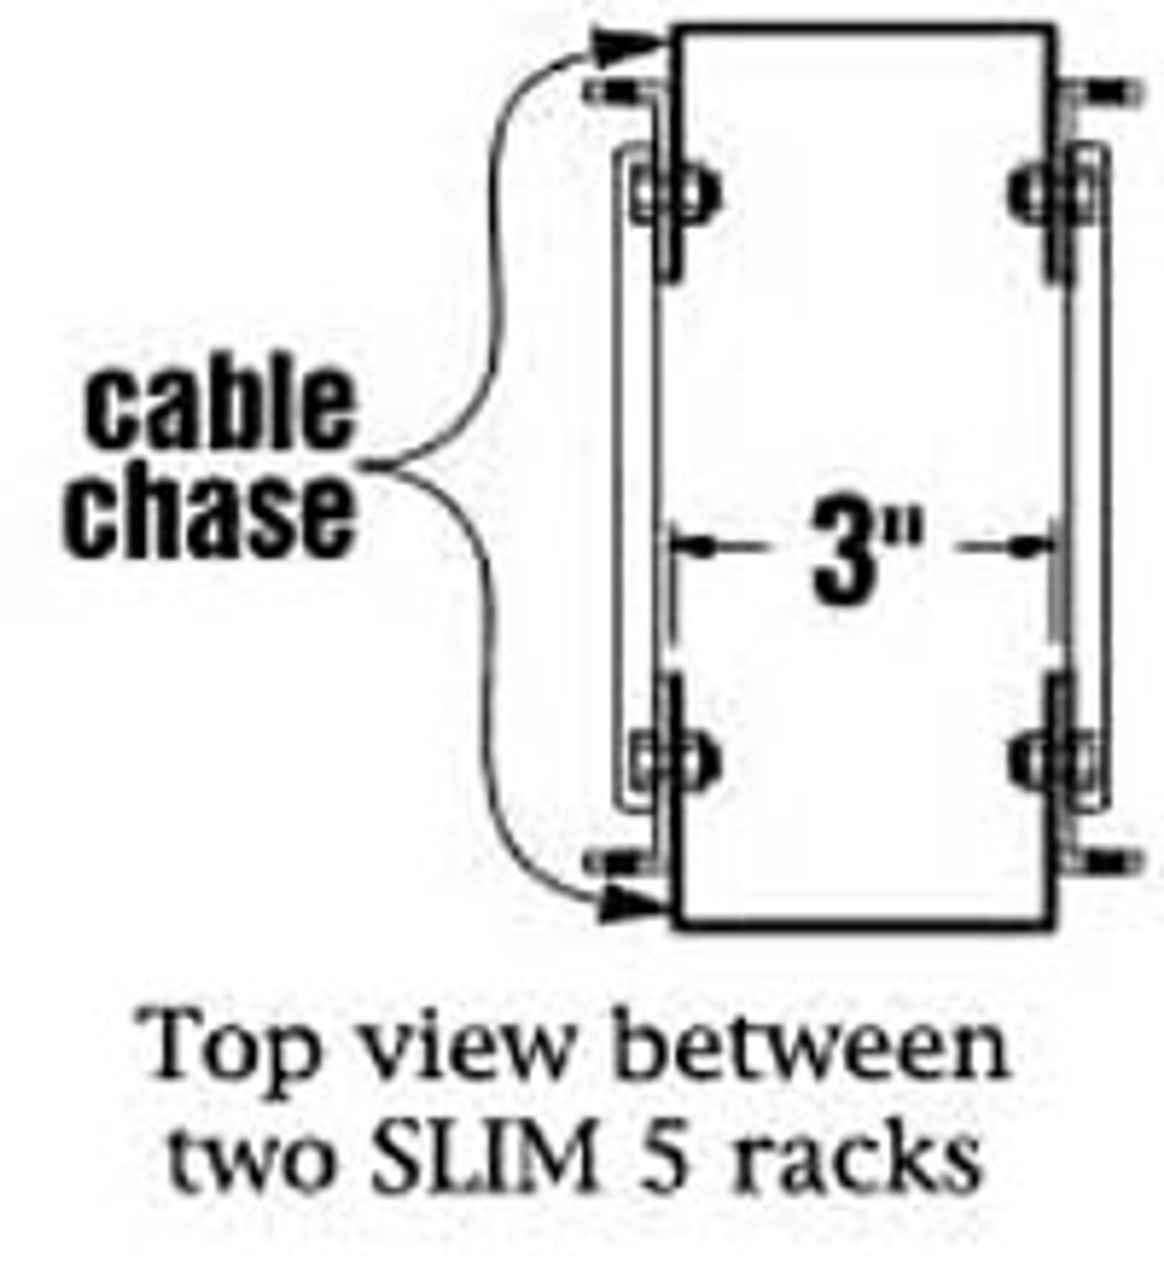 Middle Atlantic 5CC8 Cable Chase Kit for 5-8